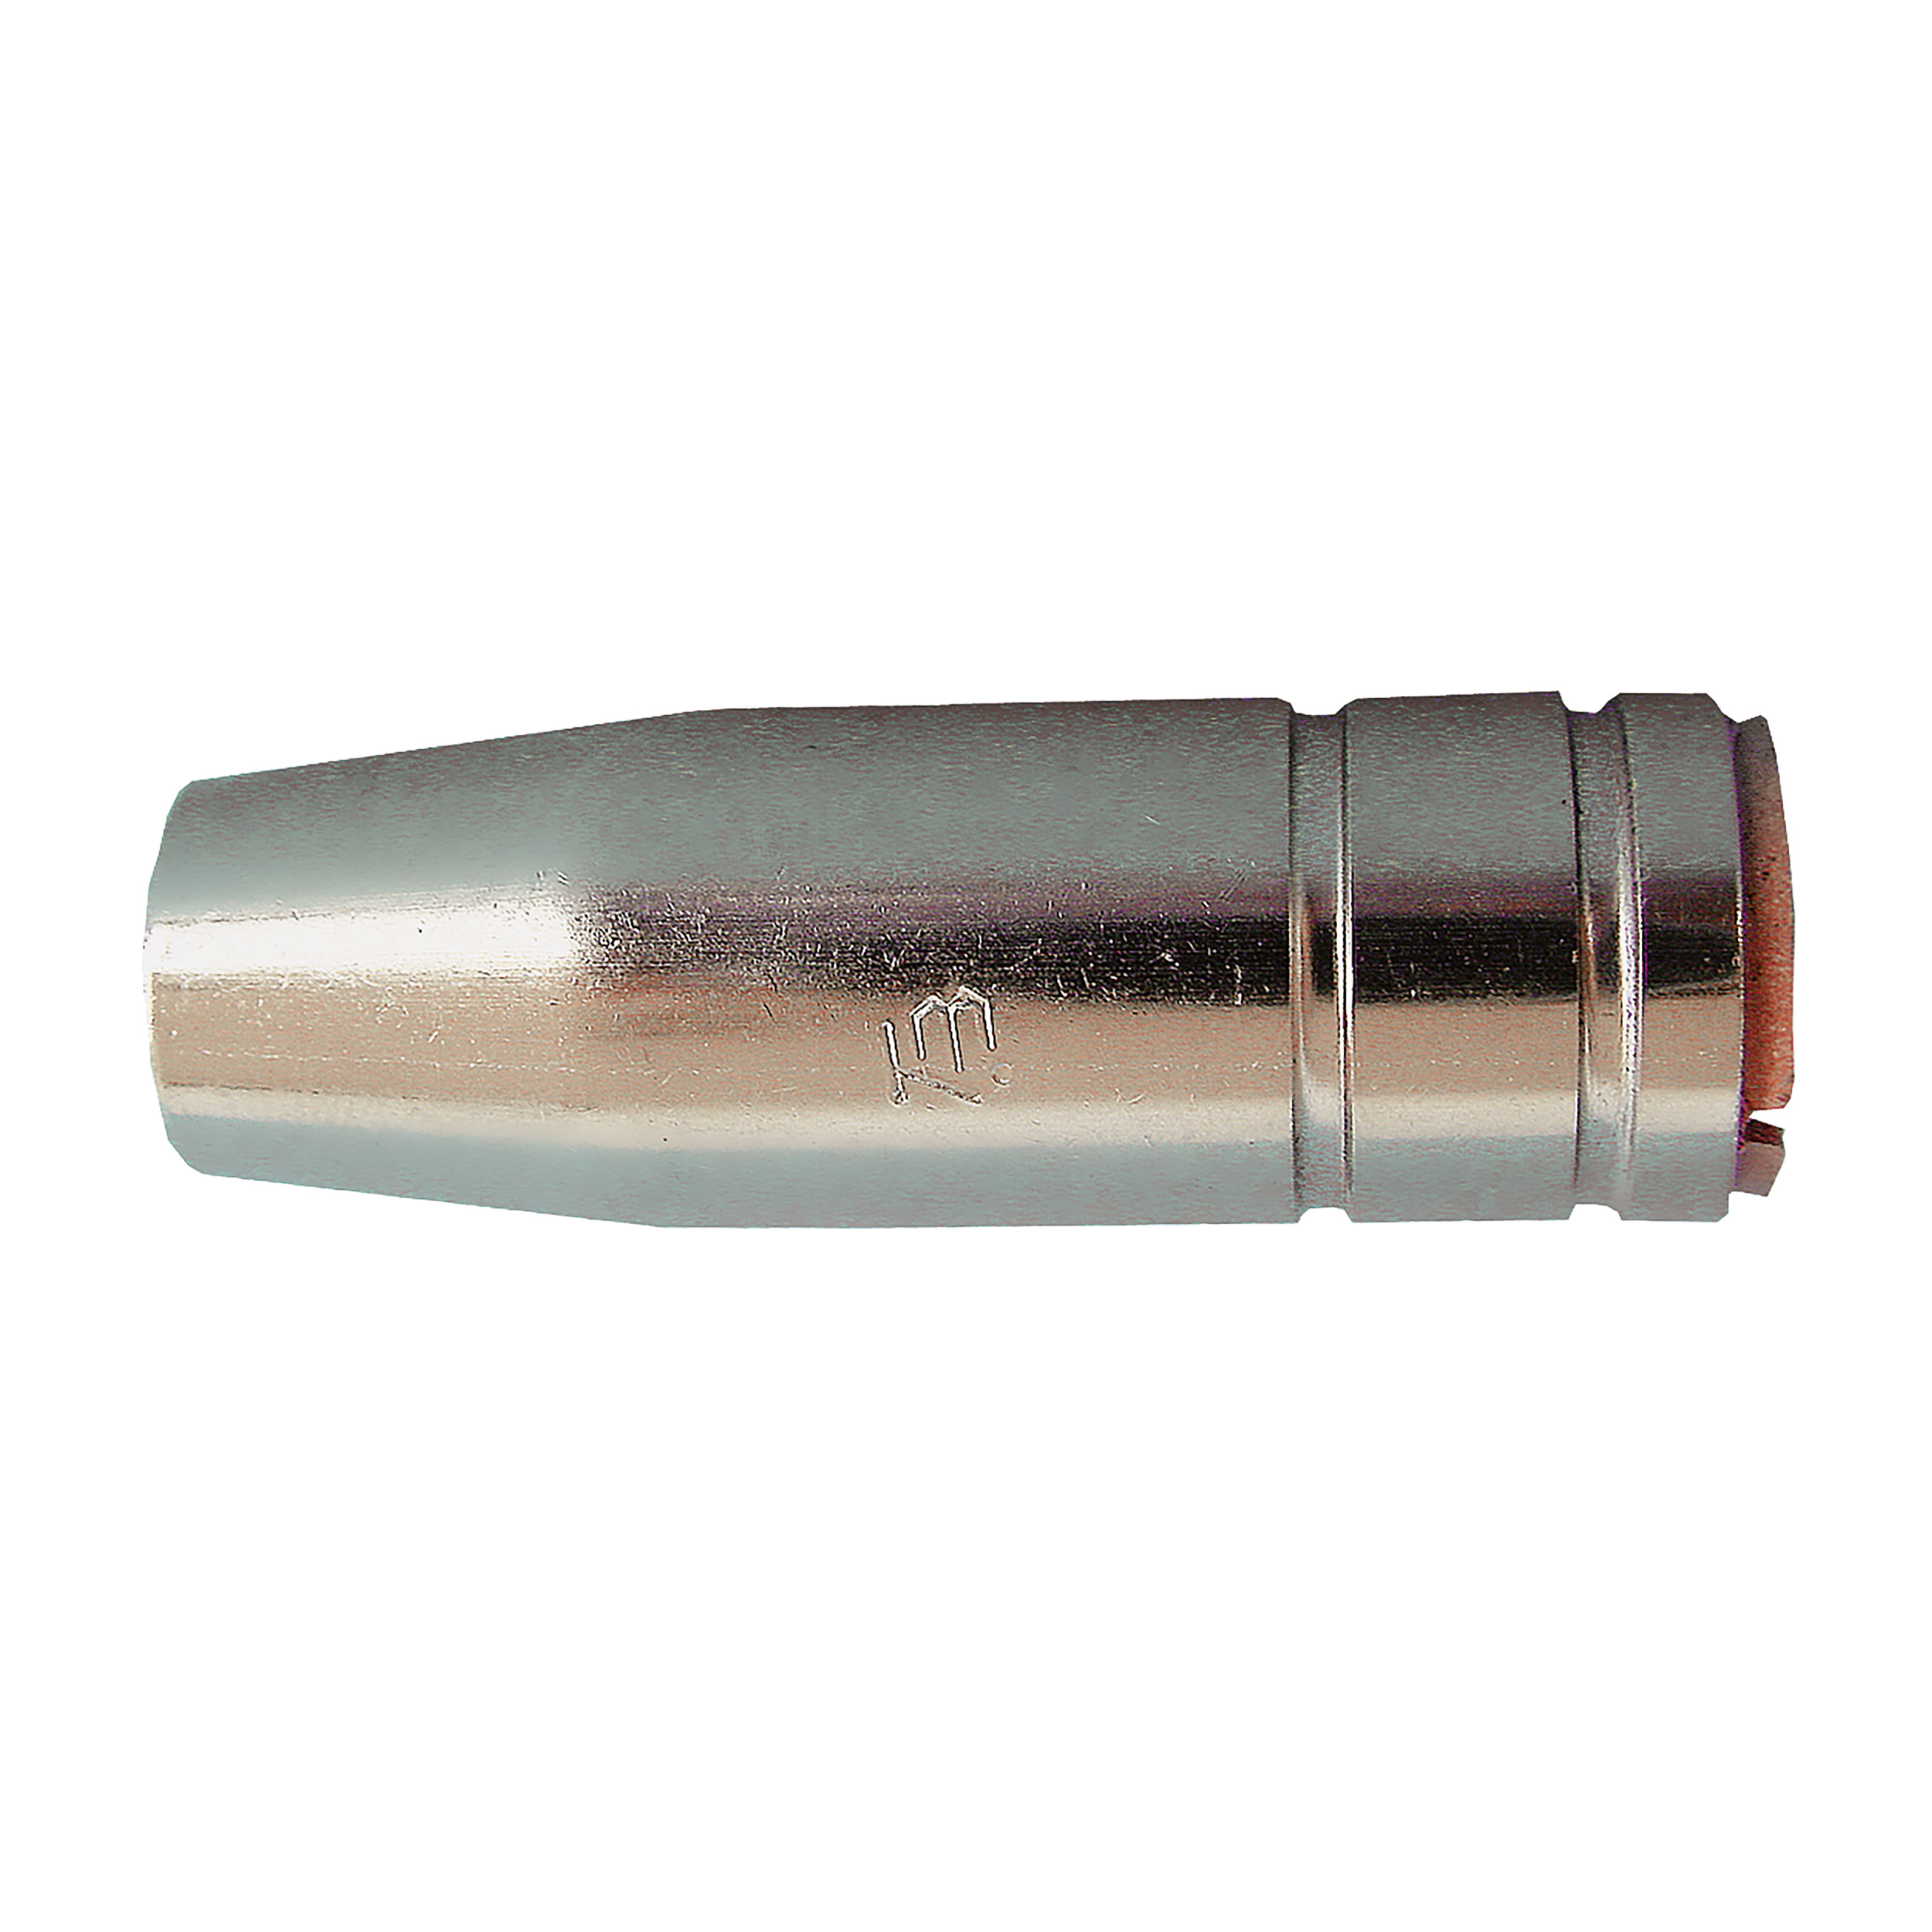 gas nozzle for TBi 140, 145 and 150, cylindrical, pluggable NW 16, Ø 18mm, length: 55mm